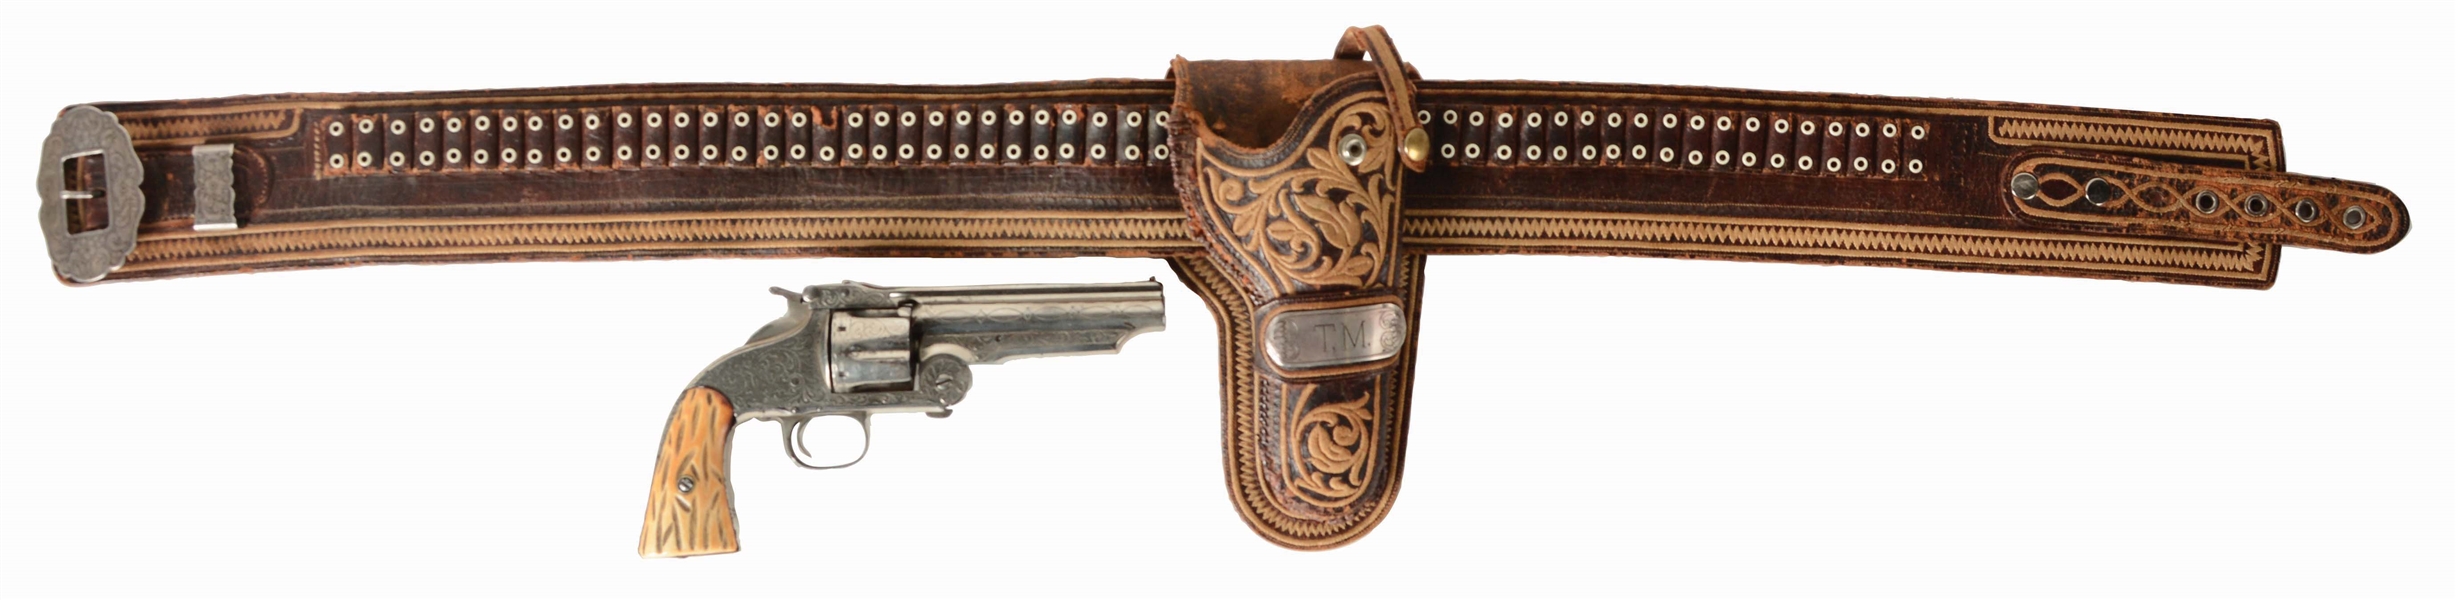 (A) SMITH & WESSON 2ND MODEL AMERICAN WITH TOM MIX RIG - BOHLIN MADE SILVER.